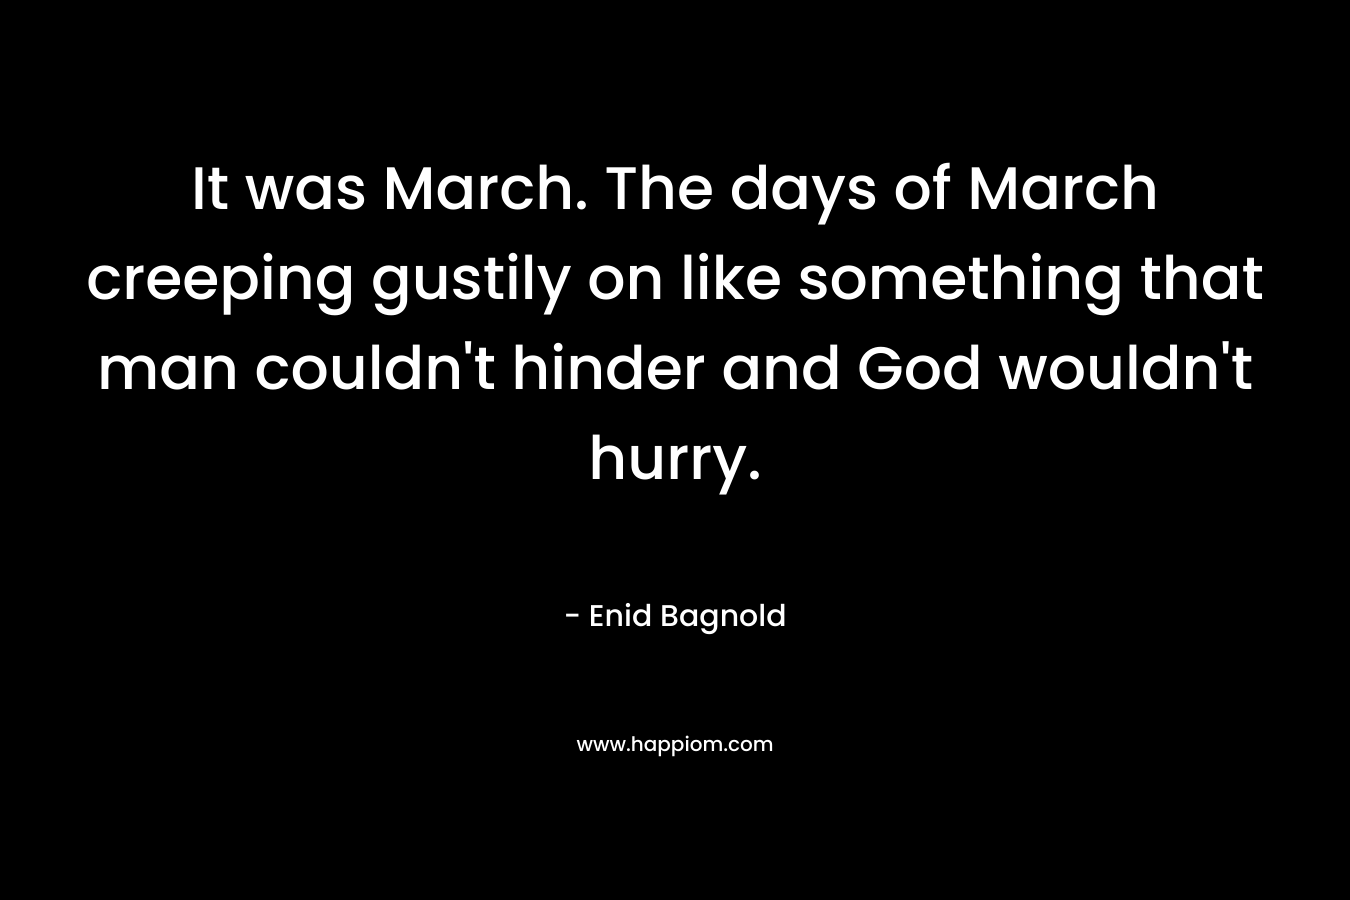 It was March. The days of March creeping gustily on like something that man couldn’t hinder and God wouldn’t hurry. – Enid Bagnold